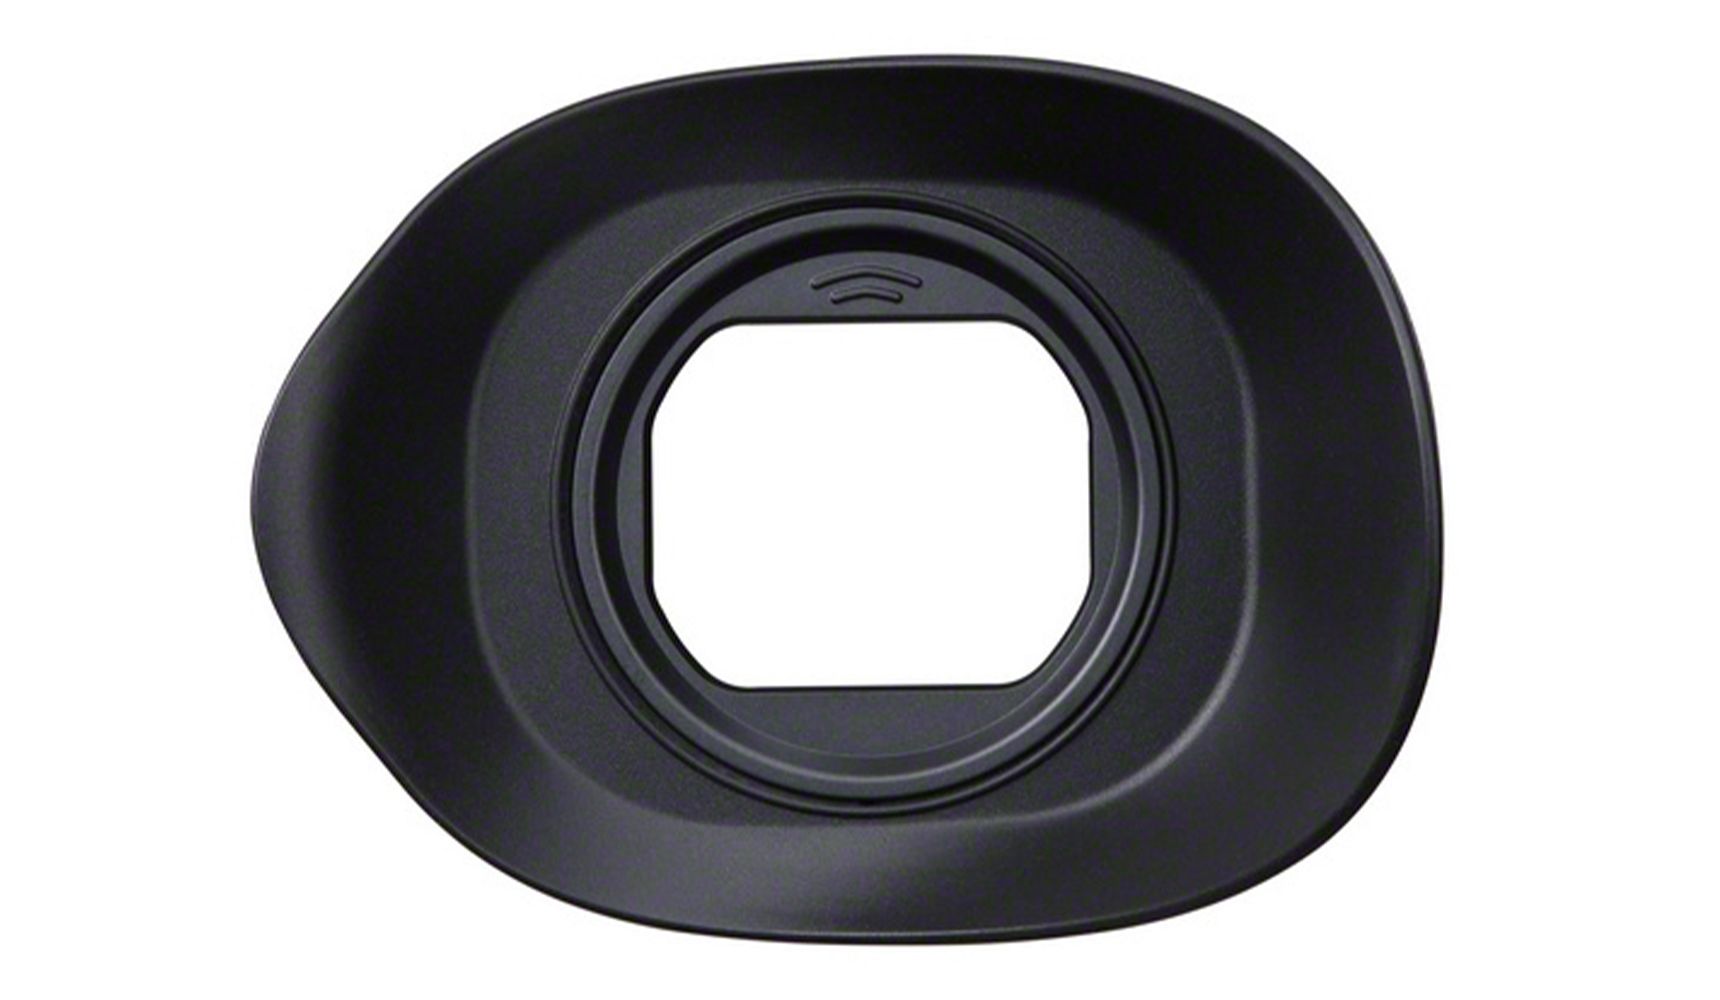 CANON - 6534C001 - Eyecup K500 for EOS R1